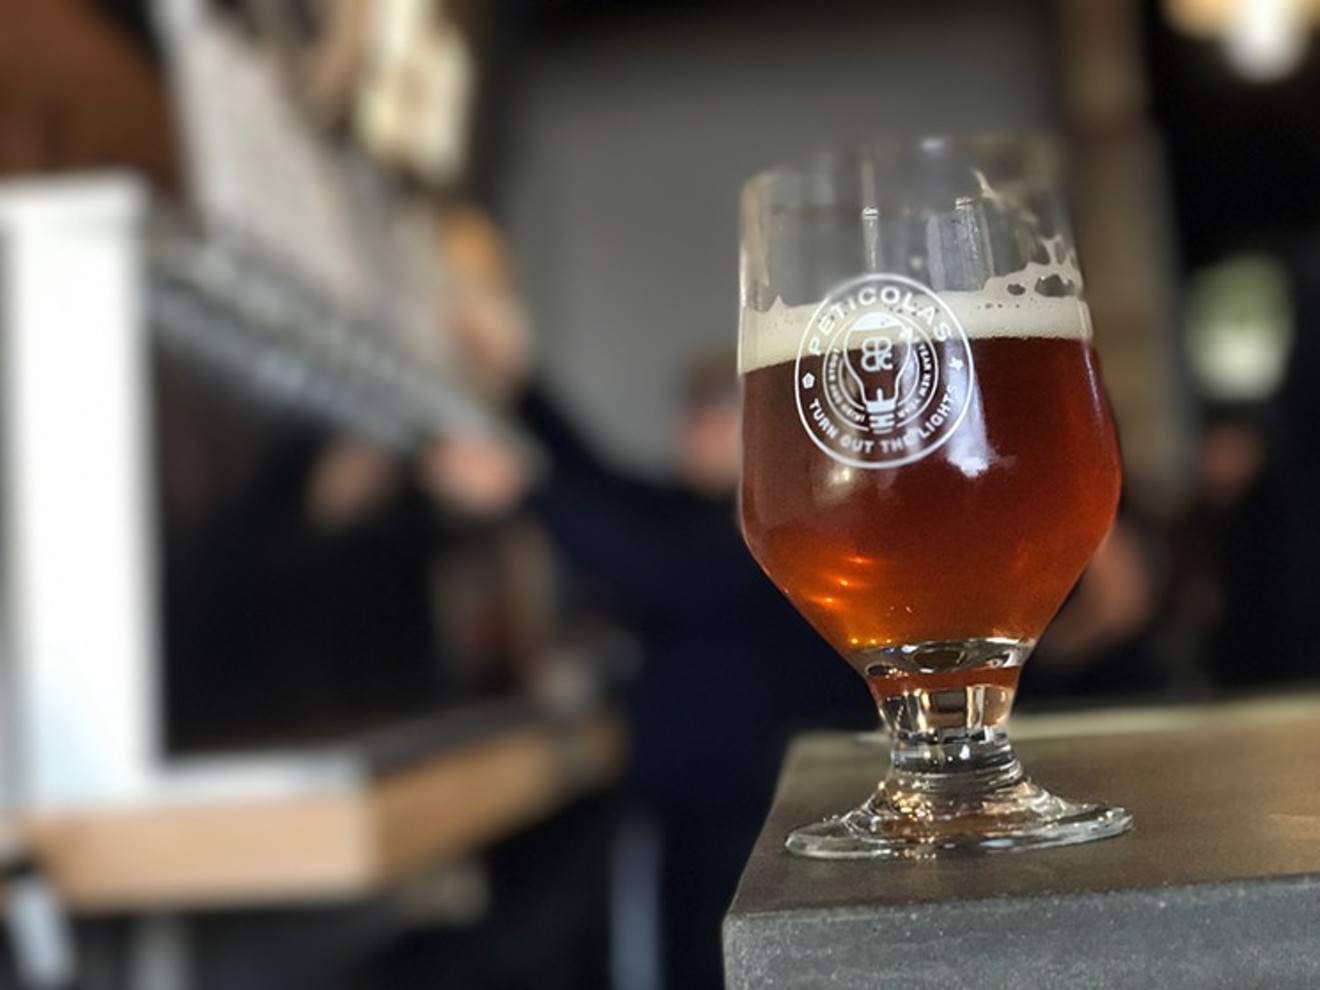 Peticolas opened a new taproom in the Design District in 2016. Under the Tax Cuts and Jobs Act, craft breweries like this one could save major cash in the coming years.